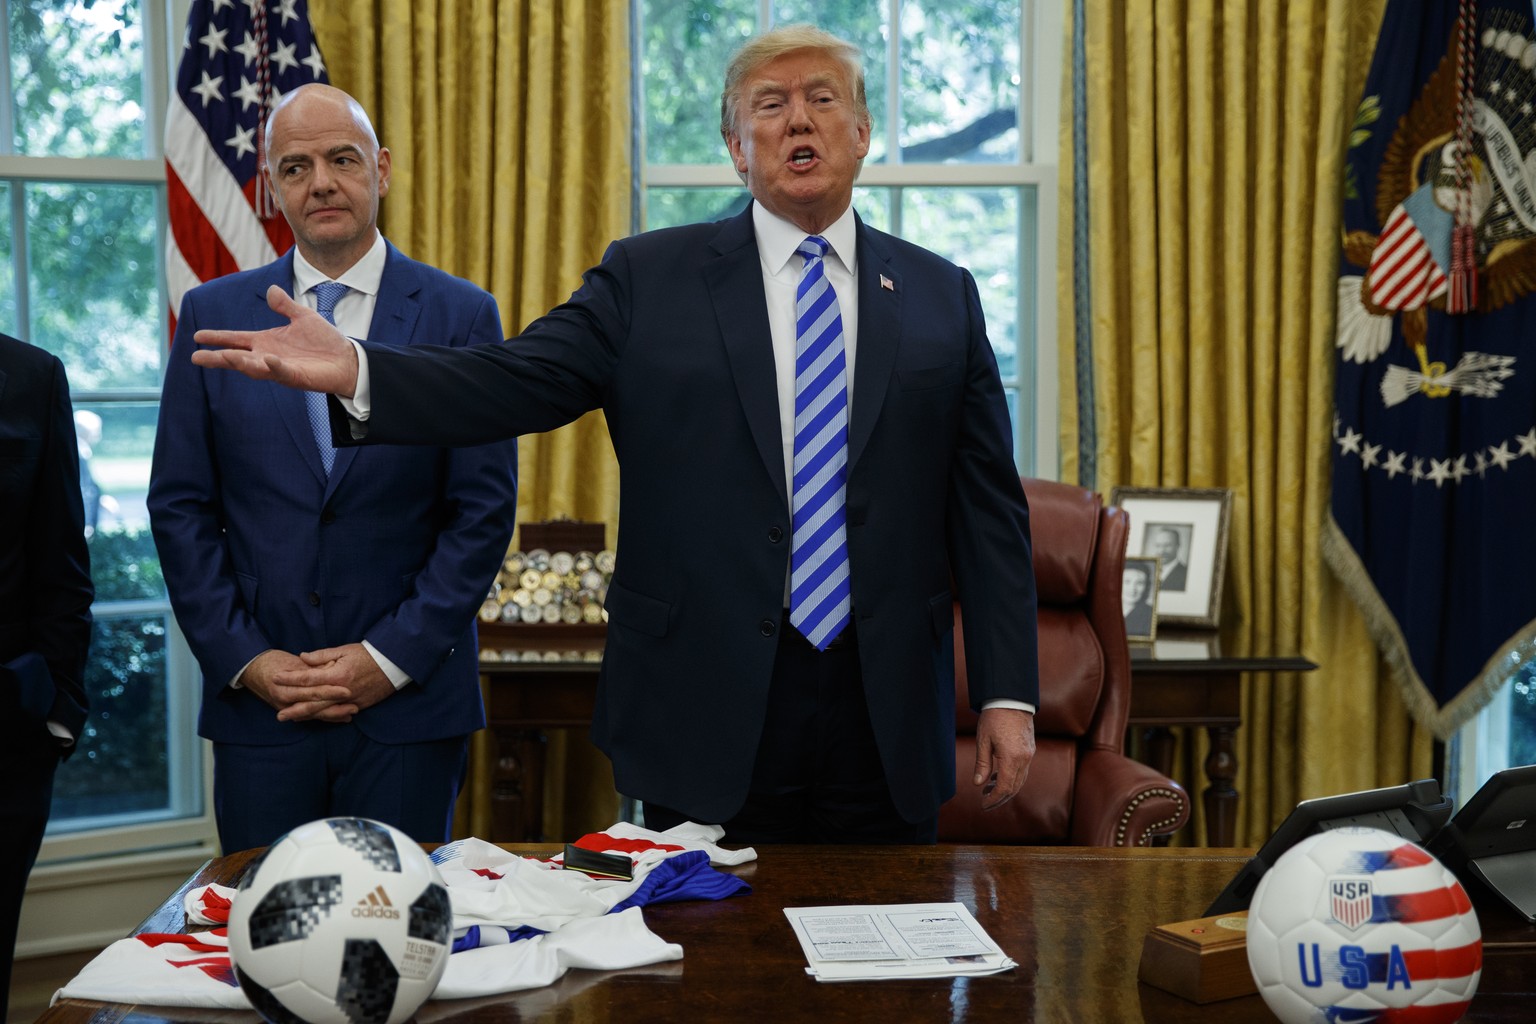 FIFA president Gianni Infantino, left, watches as President Donald Trump speaks to reporters during a meeting in the Oval Office of the White House, Tuesday, Aug. 28, 2018, in Washington. (AP Photo/Ev ...